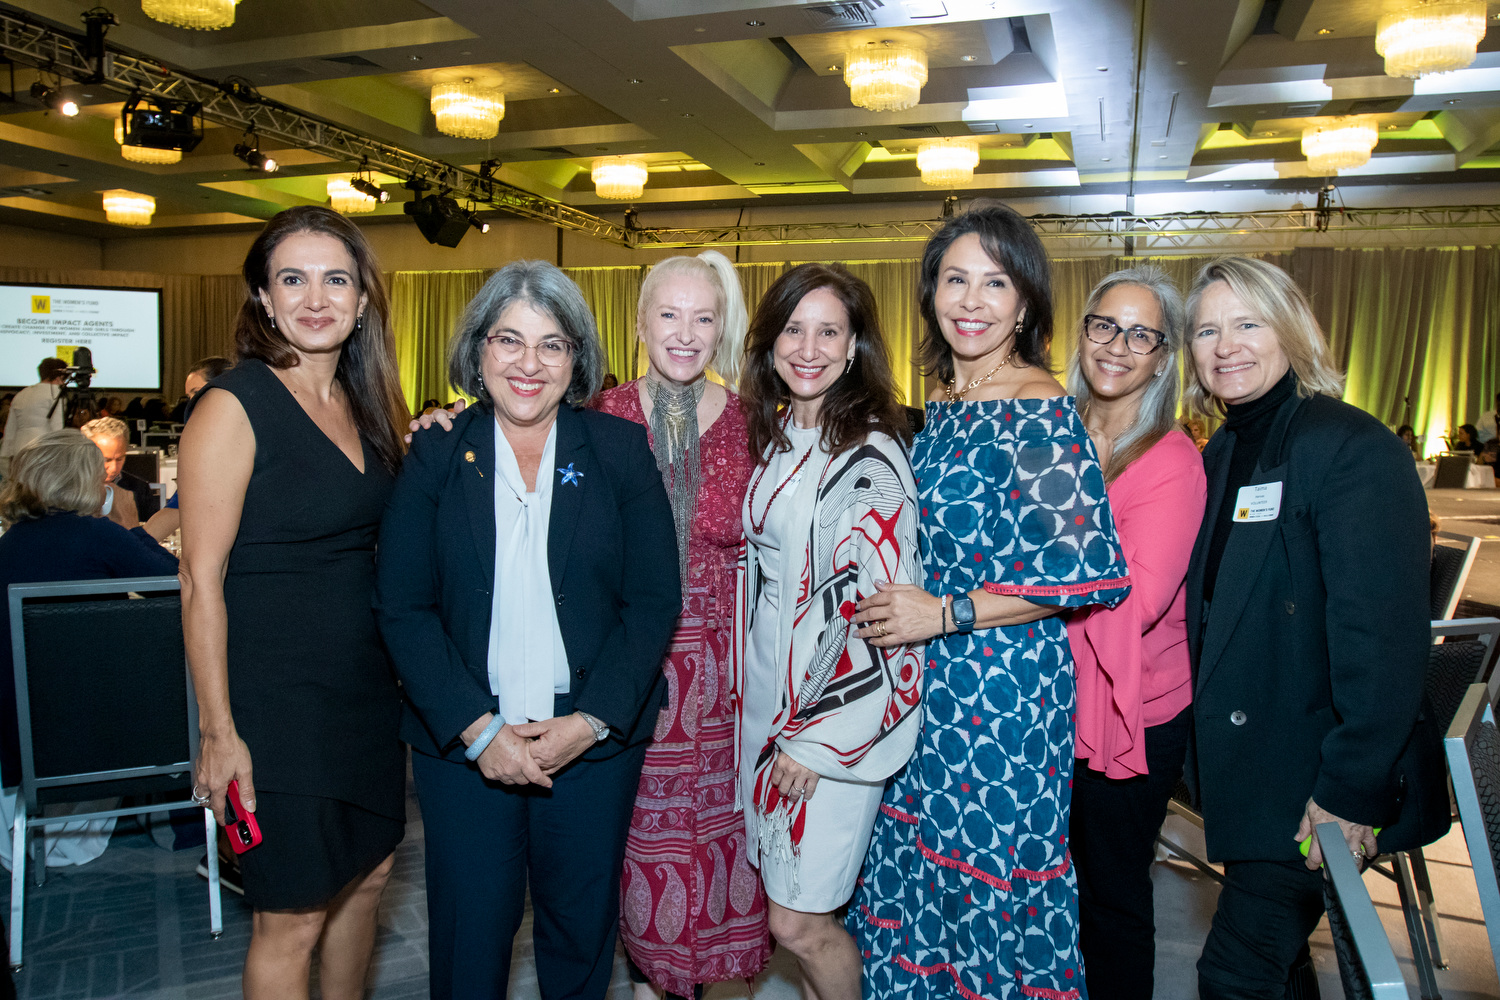 Power of the Purse 2022 Success! The Women's Fund MiamiDade